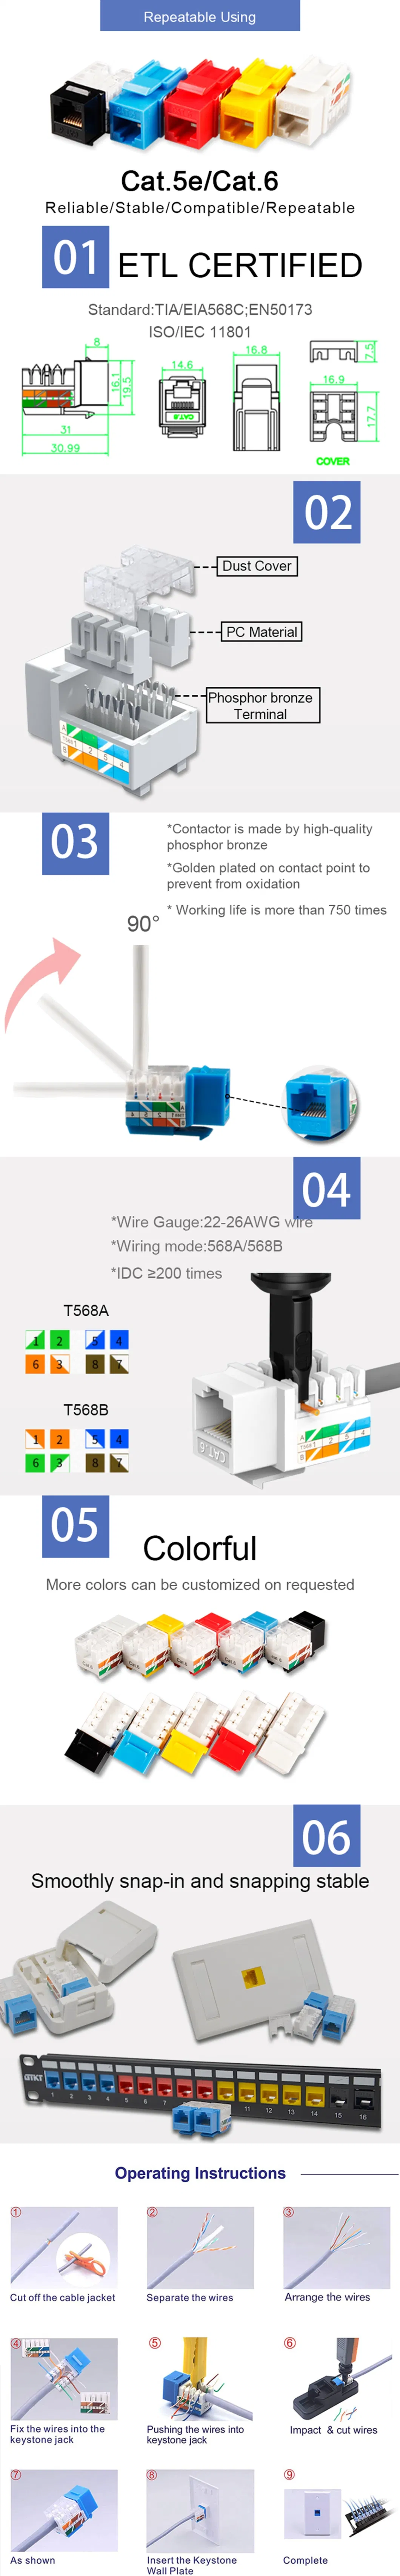 Gcabling Faceplate Face Wall Plate Termination CAT6 Panel Cat5e Wiring Diagram Ms Holder Keystone Jack